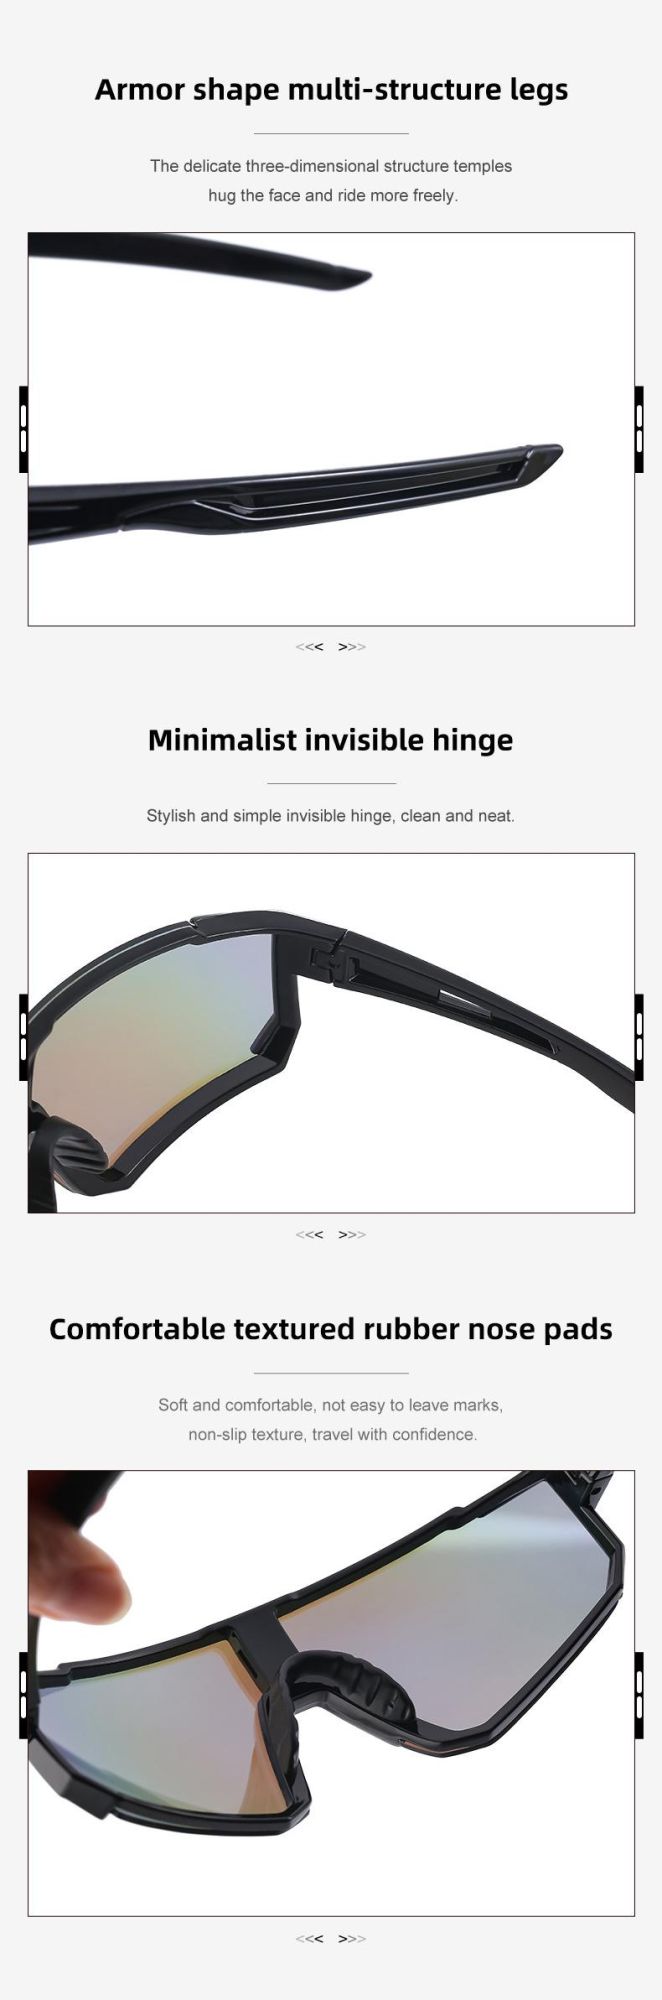 2022 New Style High Quality Men and Women Outdoor Riding Sun Glasses One-Piece Lens UV400 Sports Sunglasses